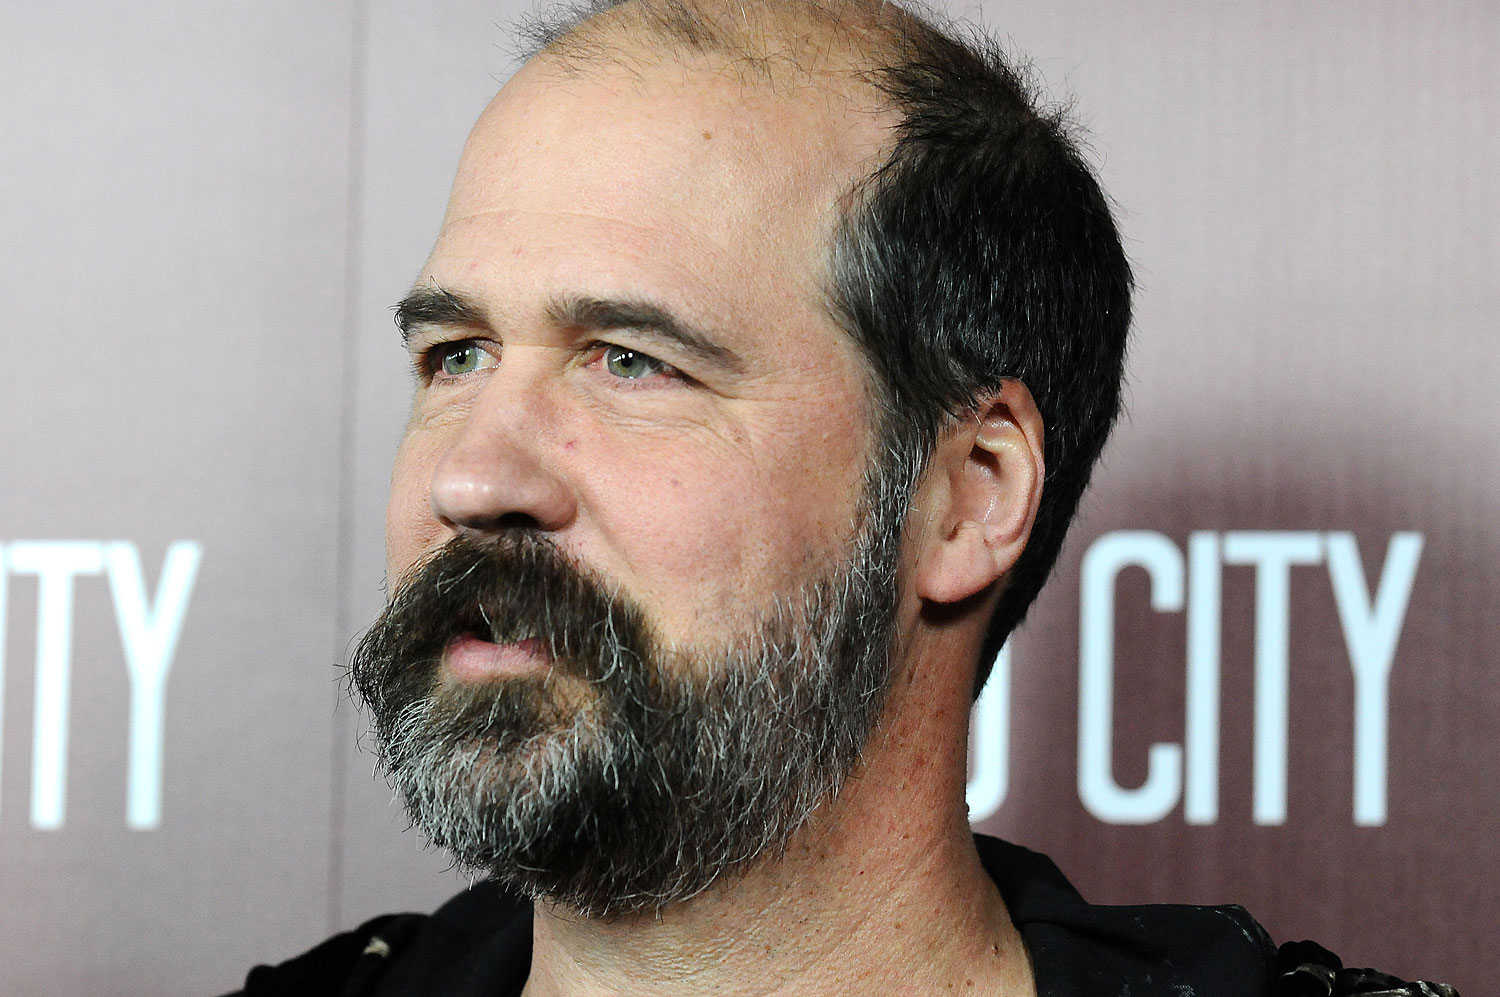 Krist Novoselic attends a premiere in Hollywood in 2013.